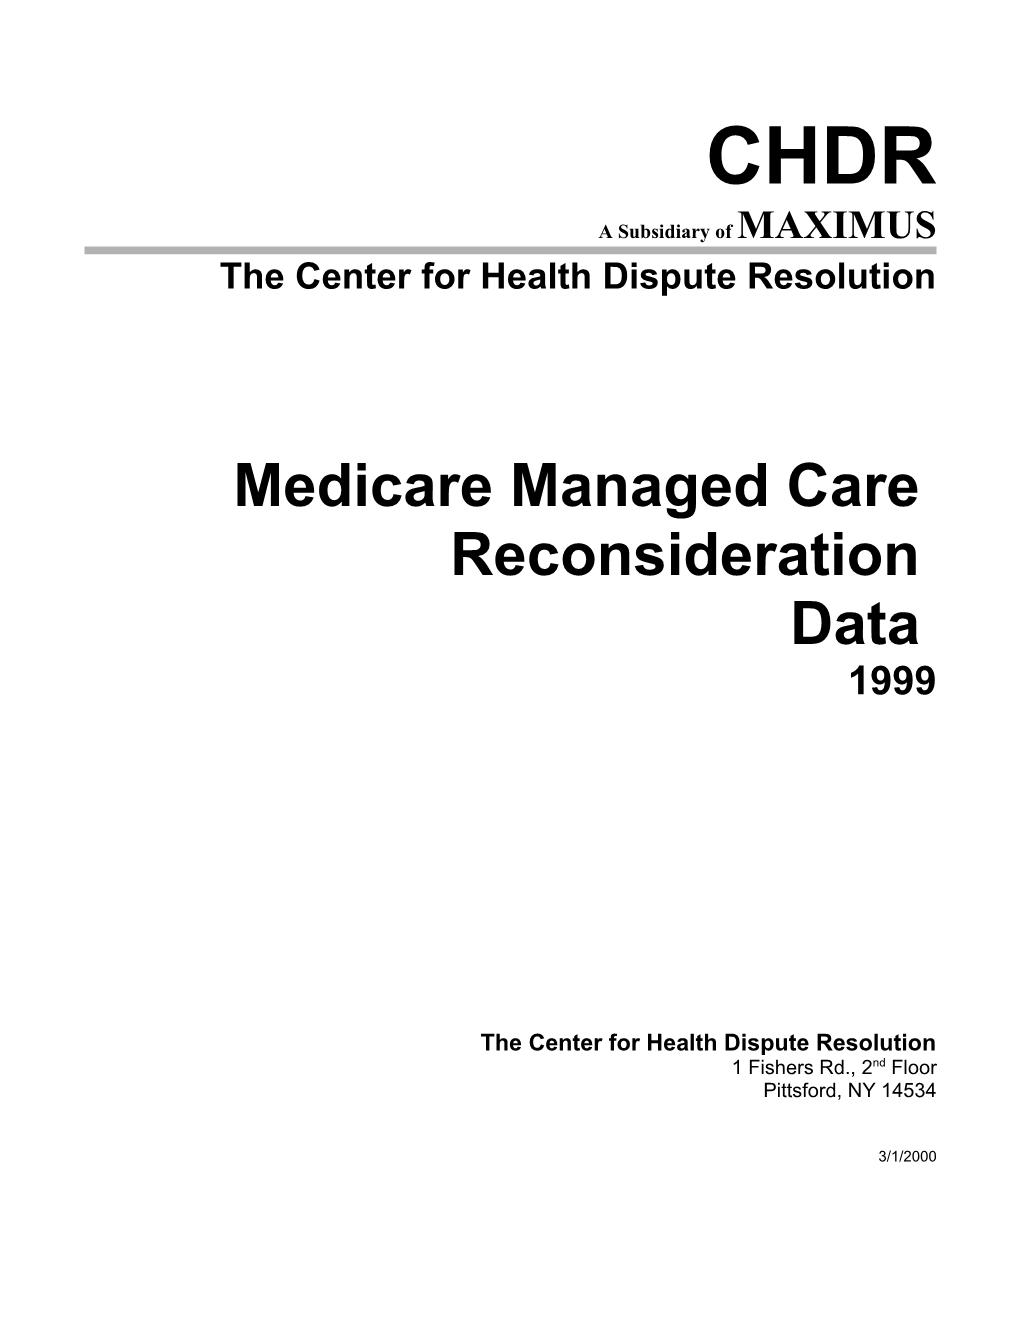 The Center for Health Dispute Resolution